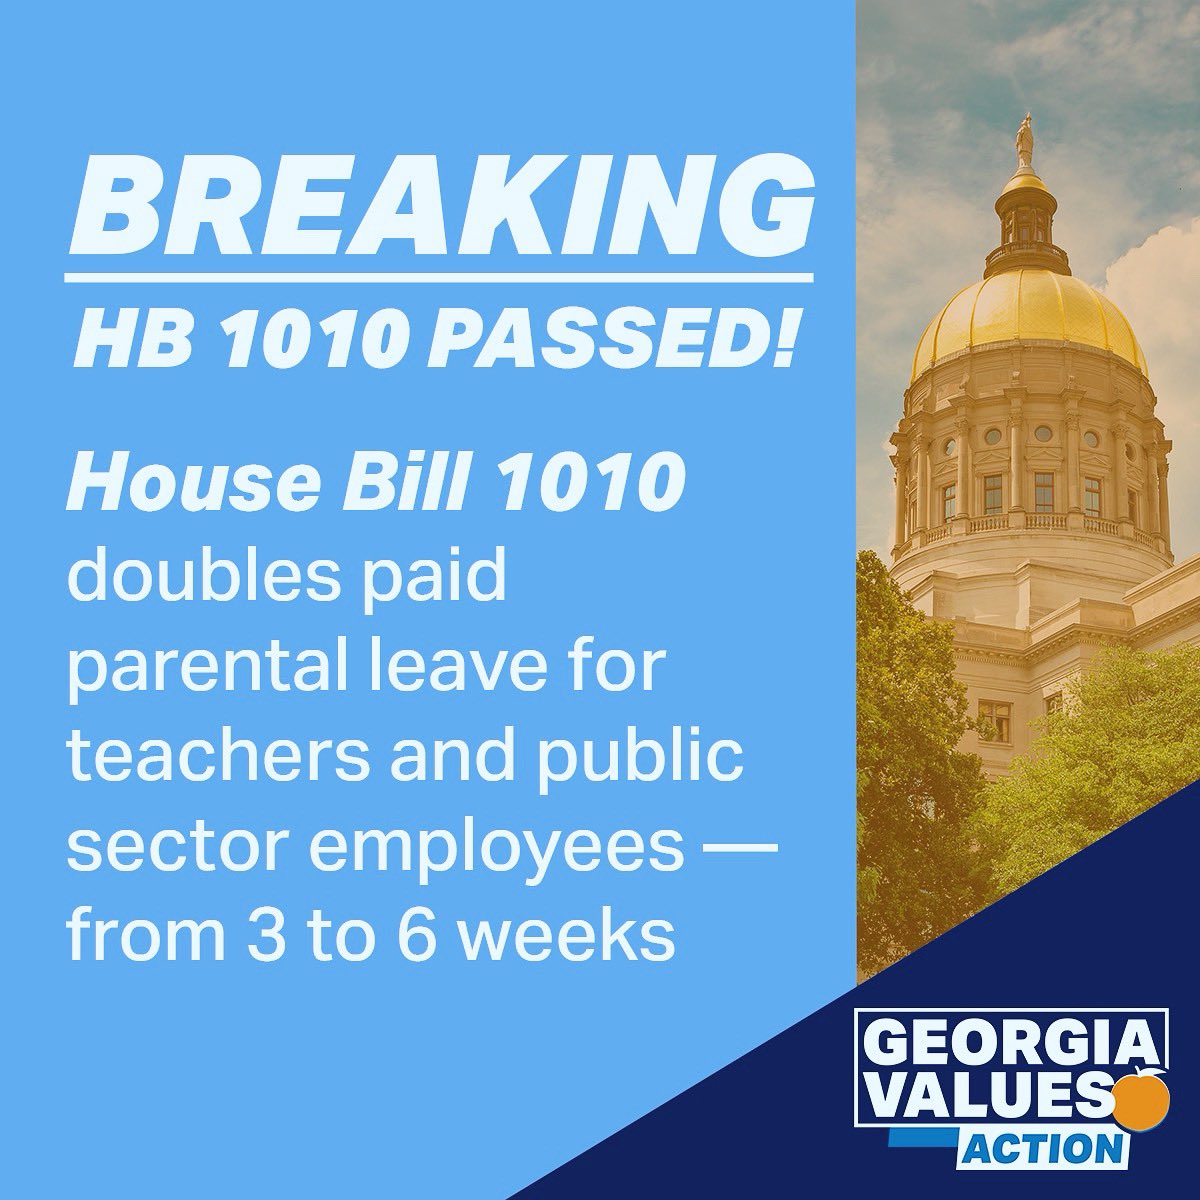 📢🎉 HB1010 has passed! This bipartisan bill doubles paid parental leave for public employees & educators, so that parents can care for their children during tender first weeks a child enters the home. While too many Georgians fall I the leave gap, this is a + next step! #gapol